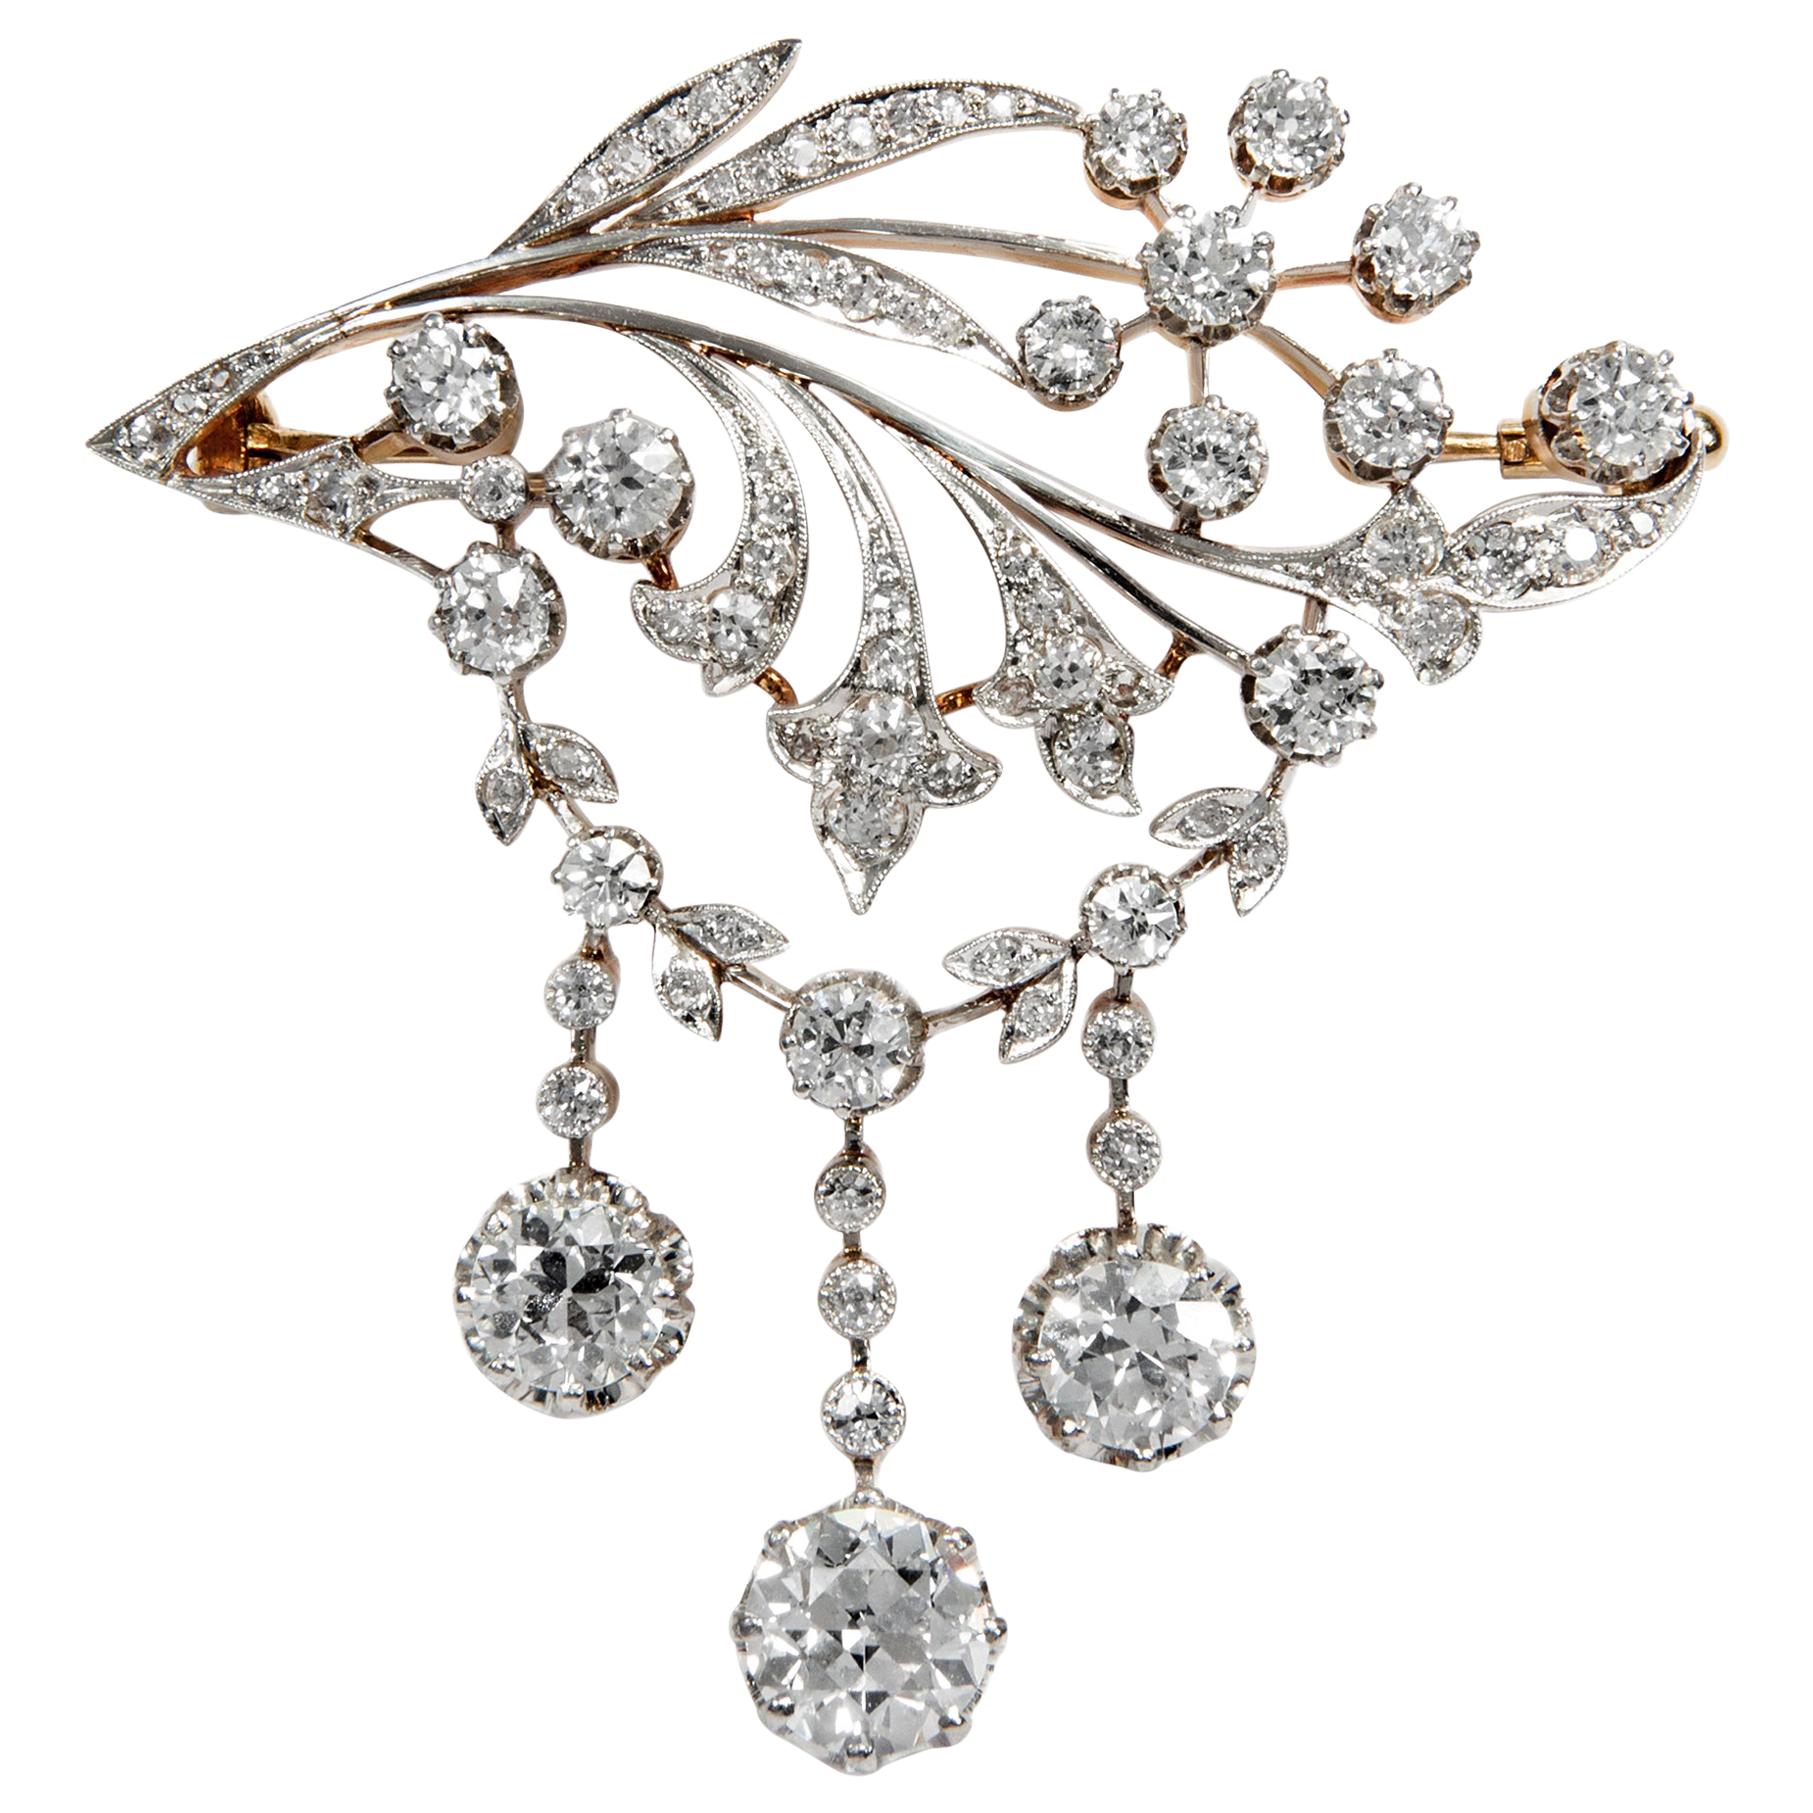 Antique Edwardian circa 1900 Certified 5.93 Carat Diamond Garland Style Brooch For Sale